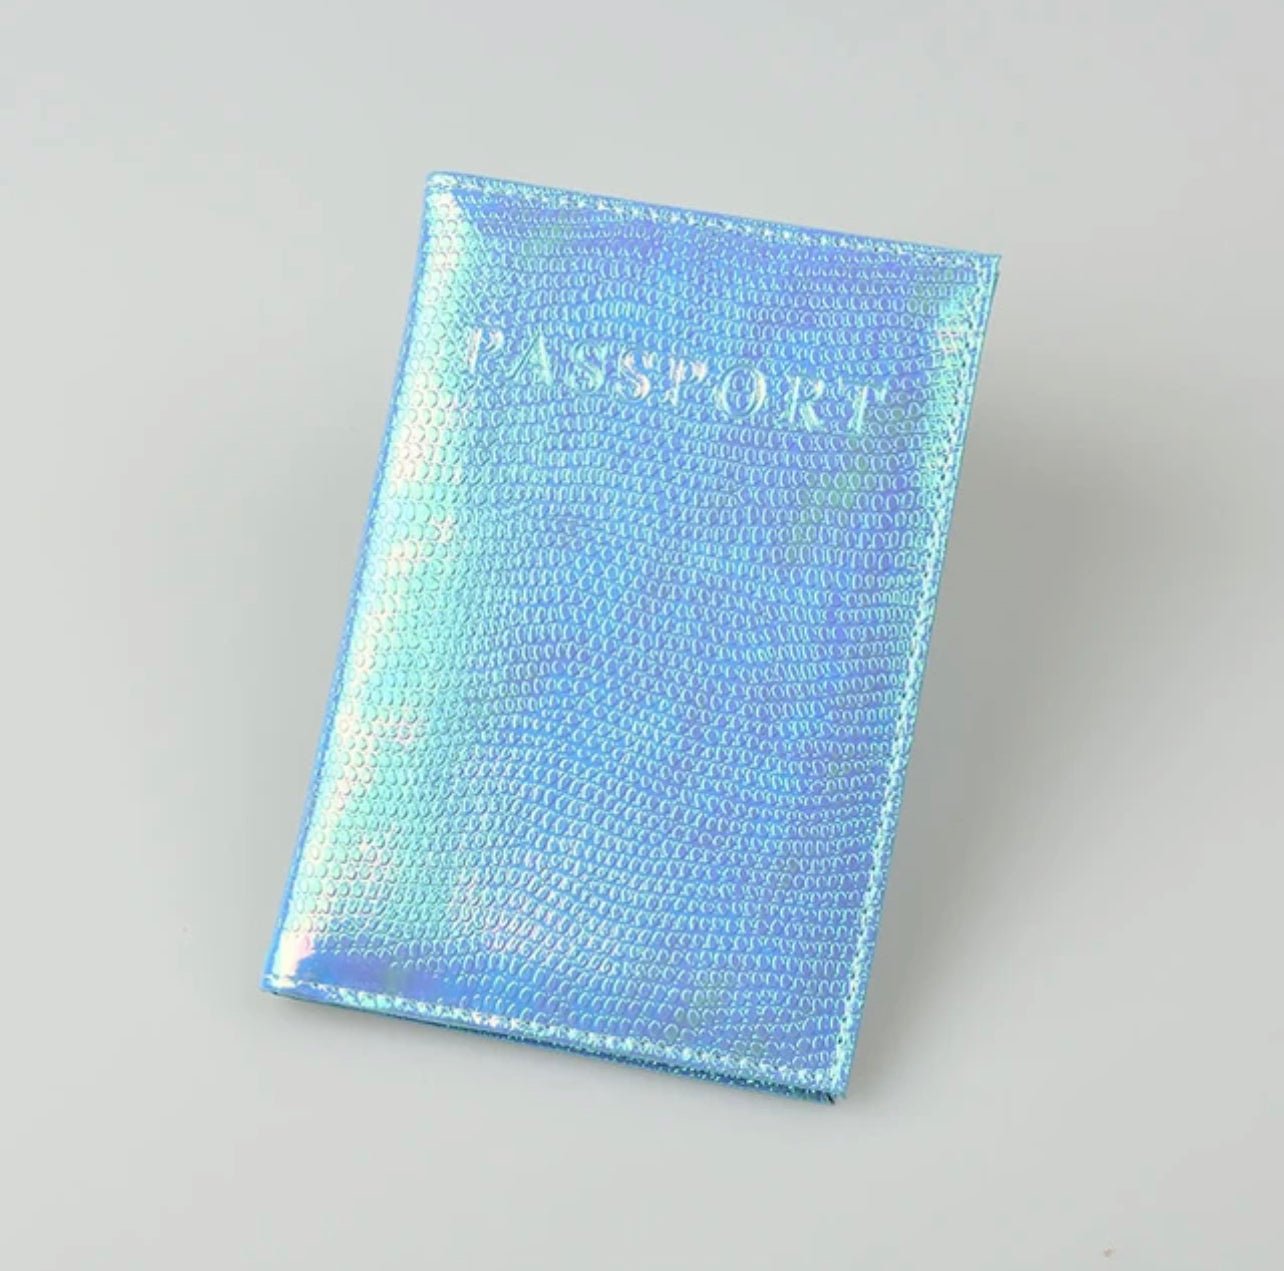 Never Lost Passport Cover 5 Colors - Suite Ta Bu by Akidah